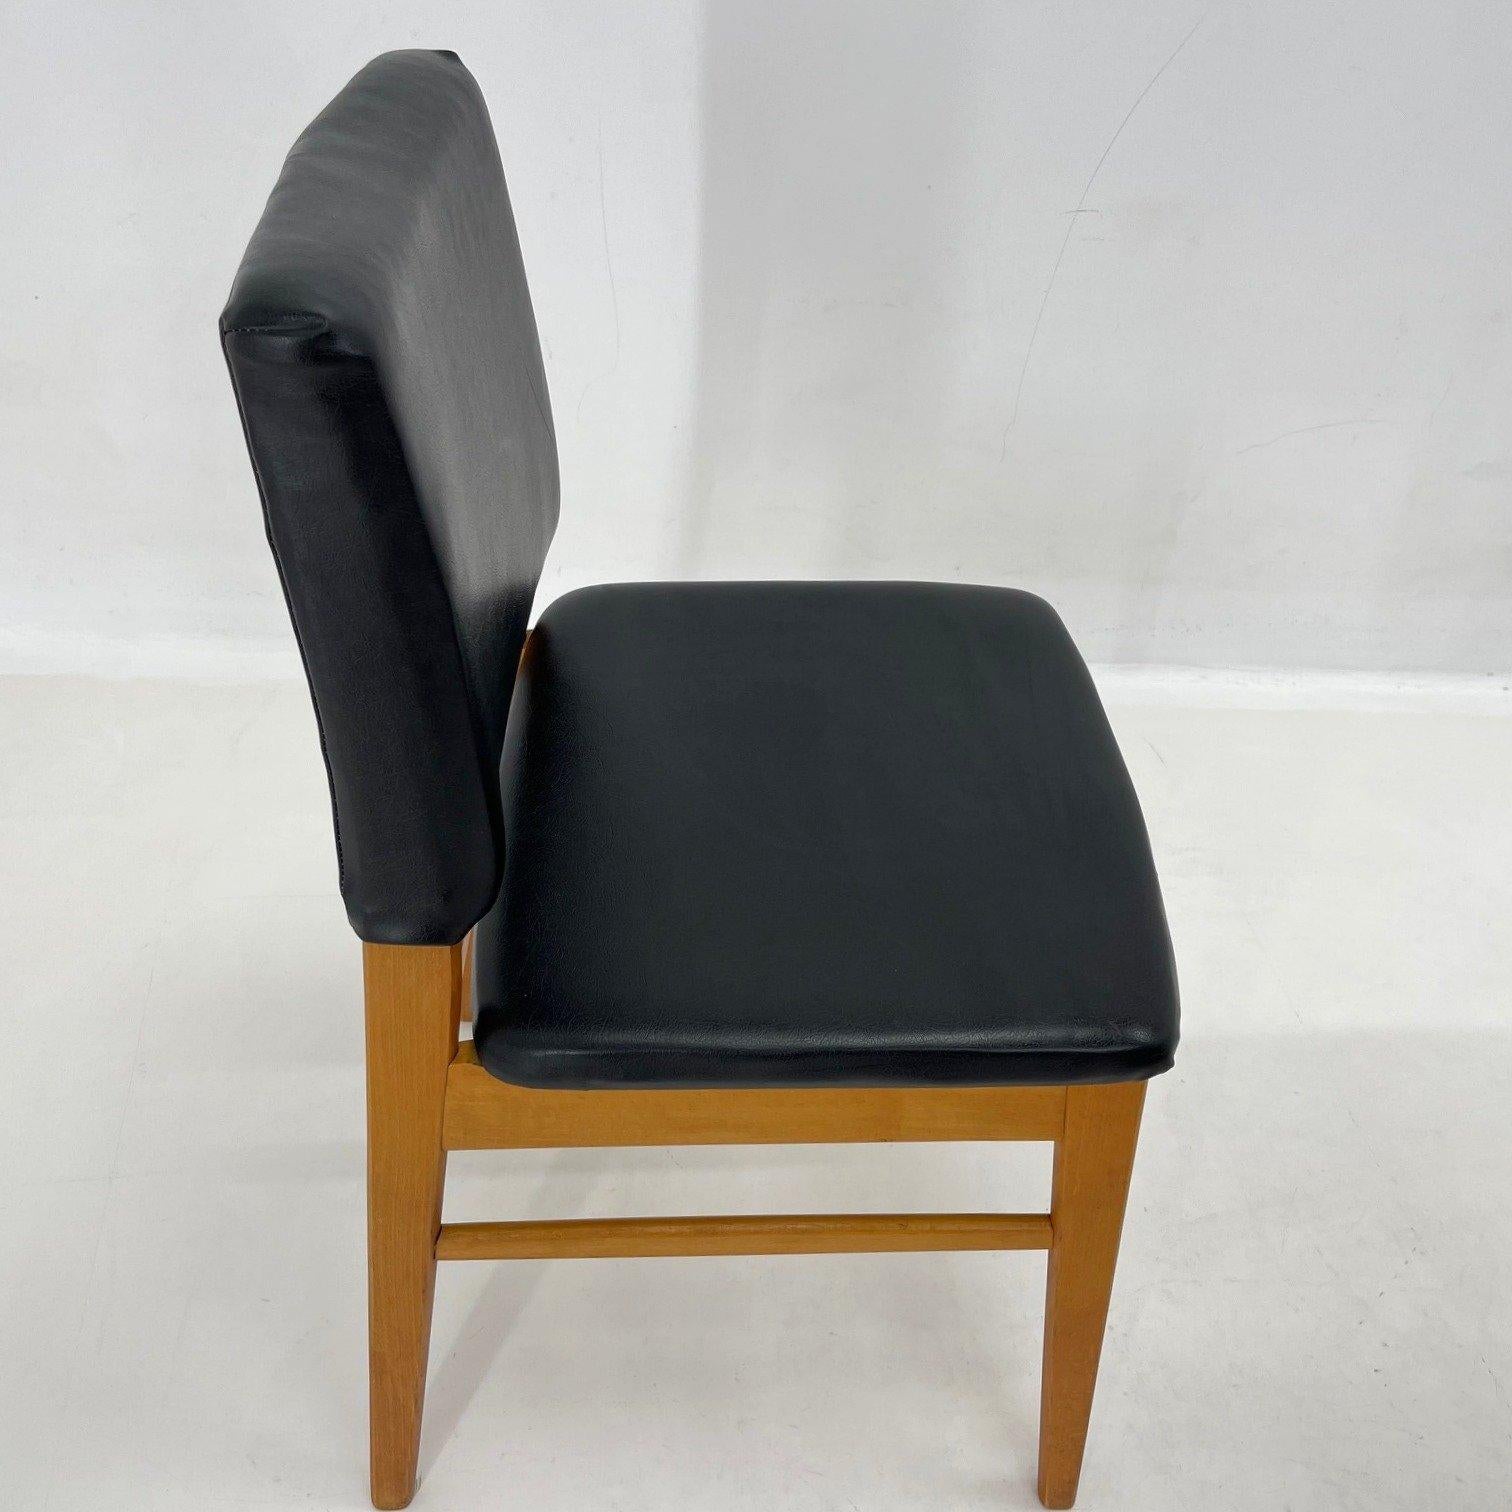 Set of 6 Leatherette & Wood Chairs, Czechoslovakia, 1960's For Sale 3